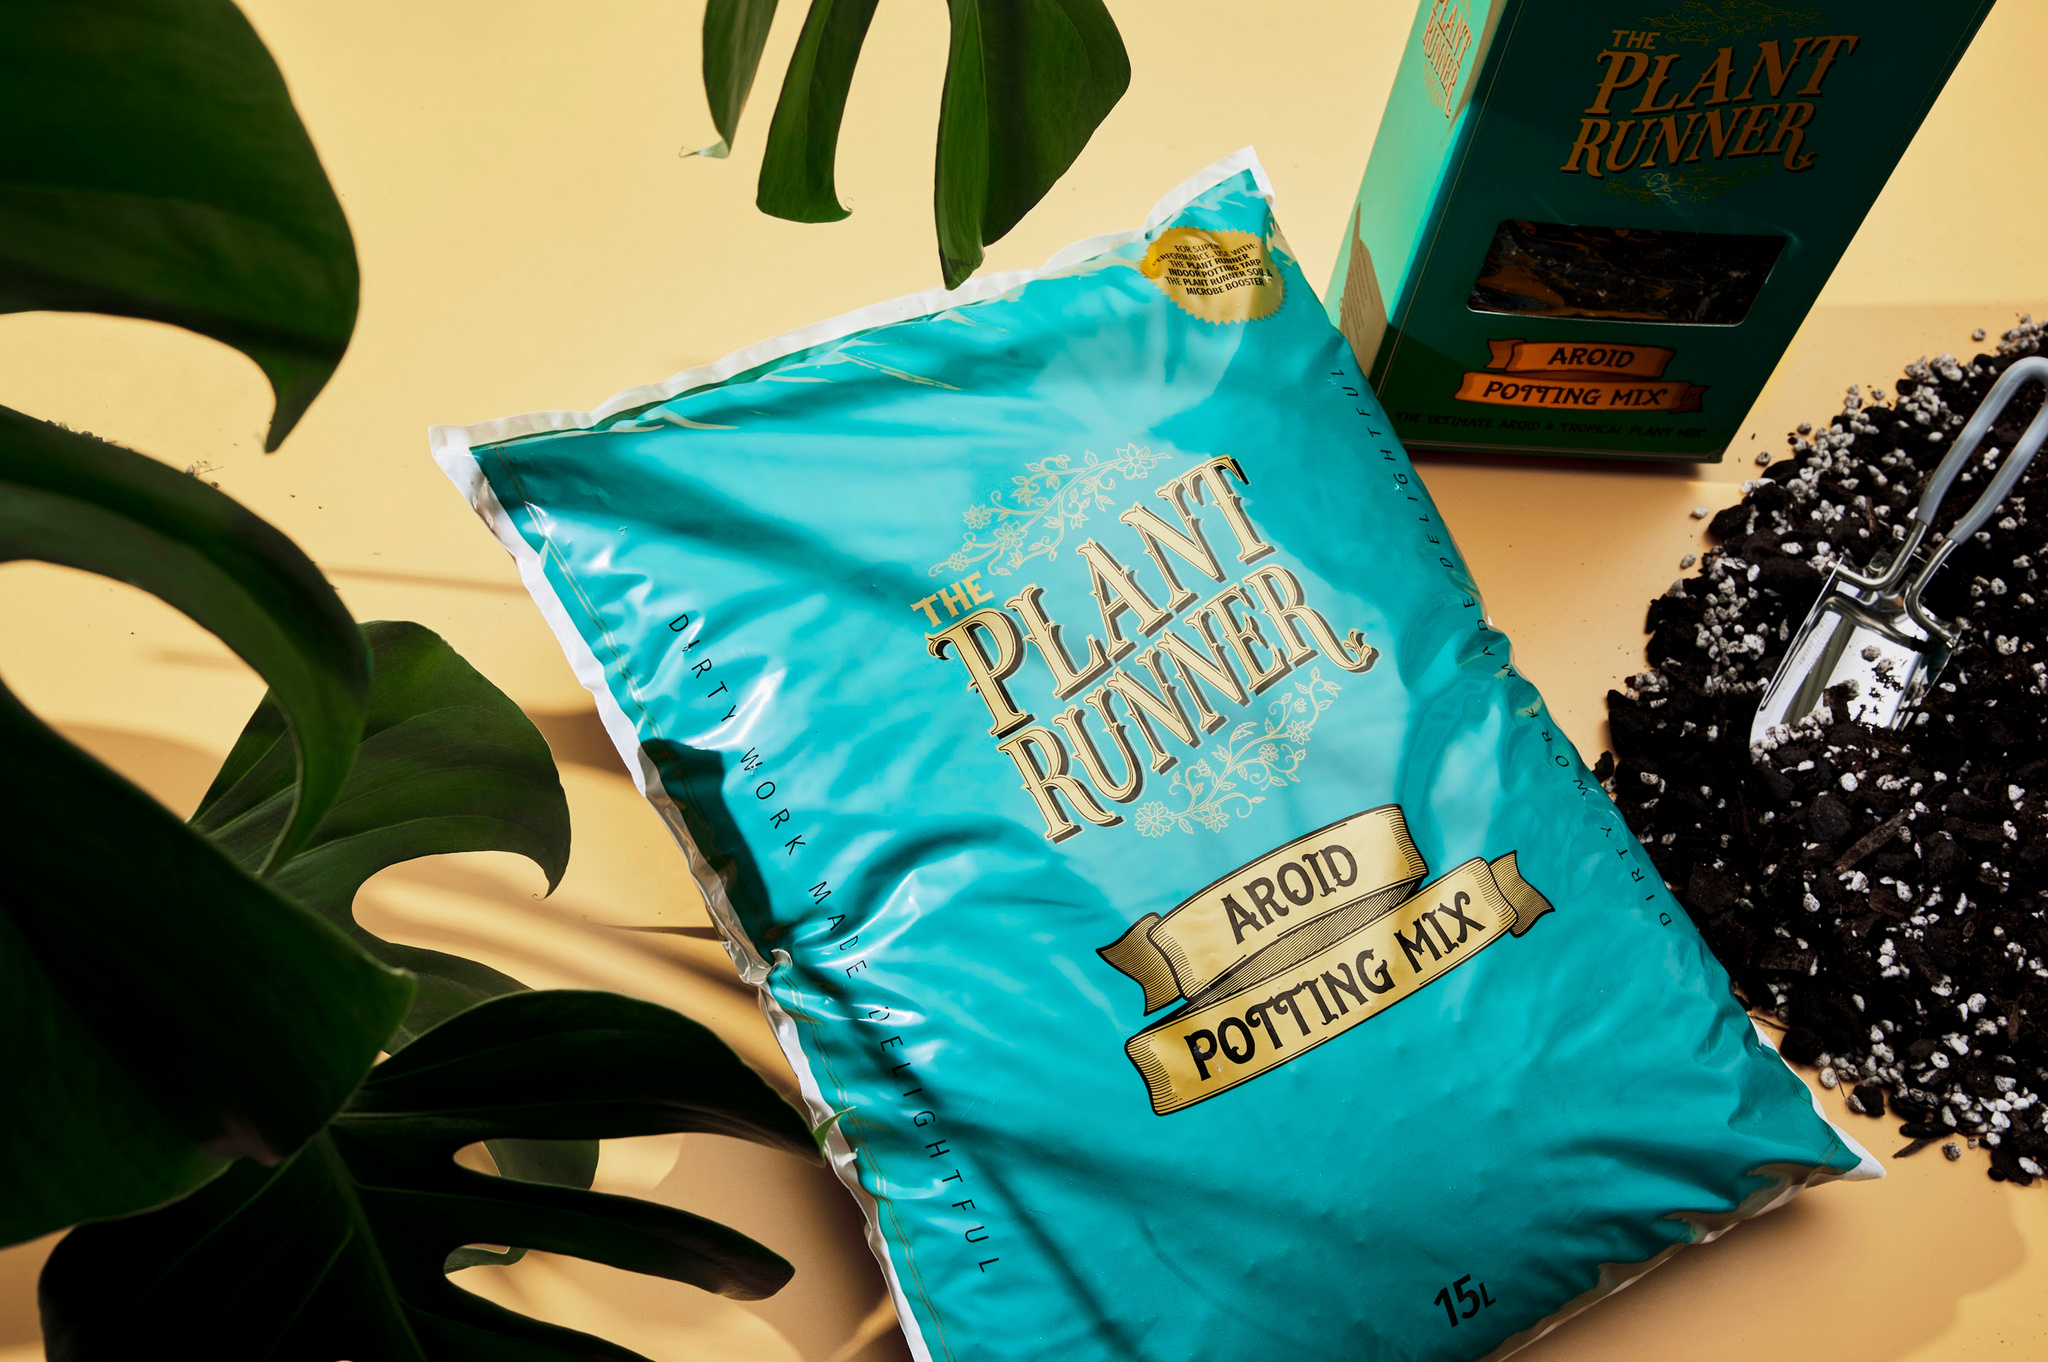 The Plant Runner Aroid Potting Mix